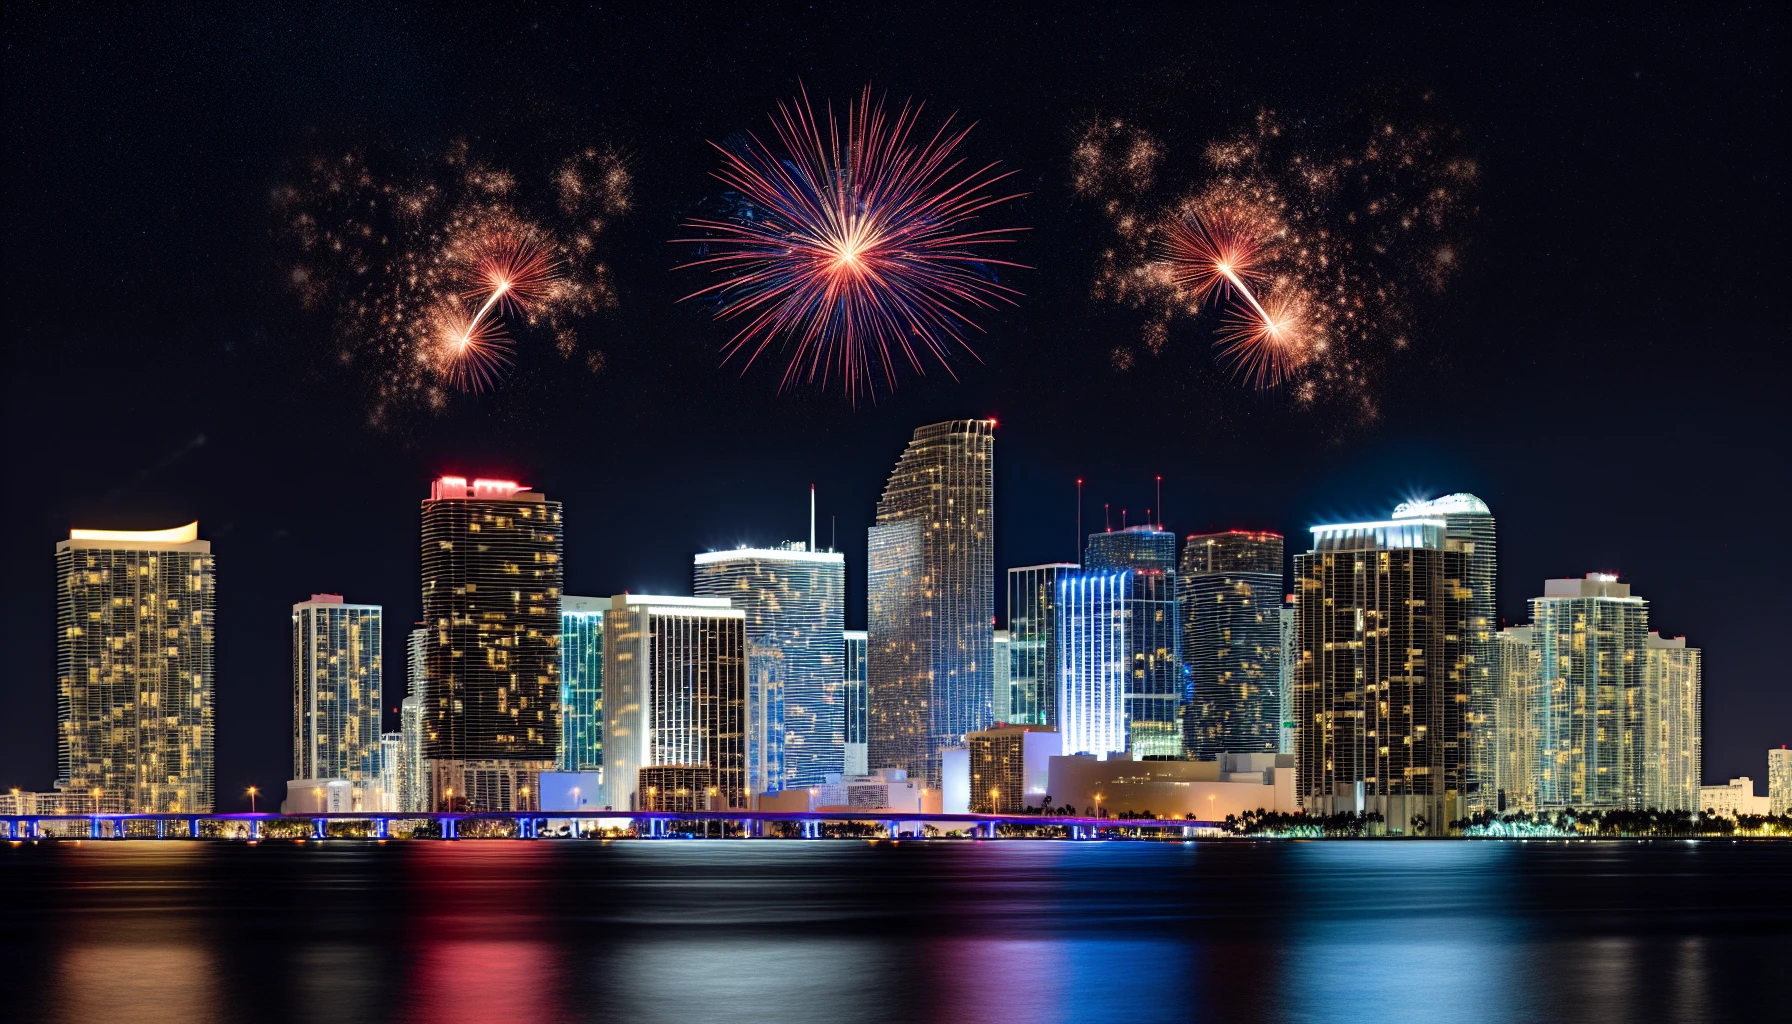 Miami skyline with fireworks illuminating the night sky during New Year's Eve